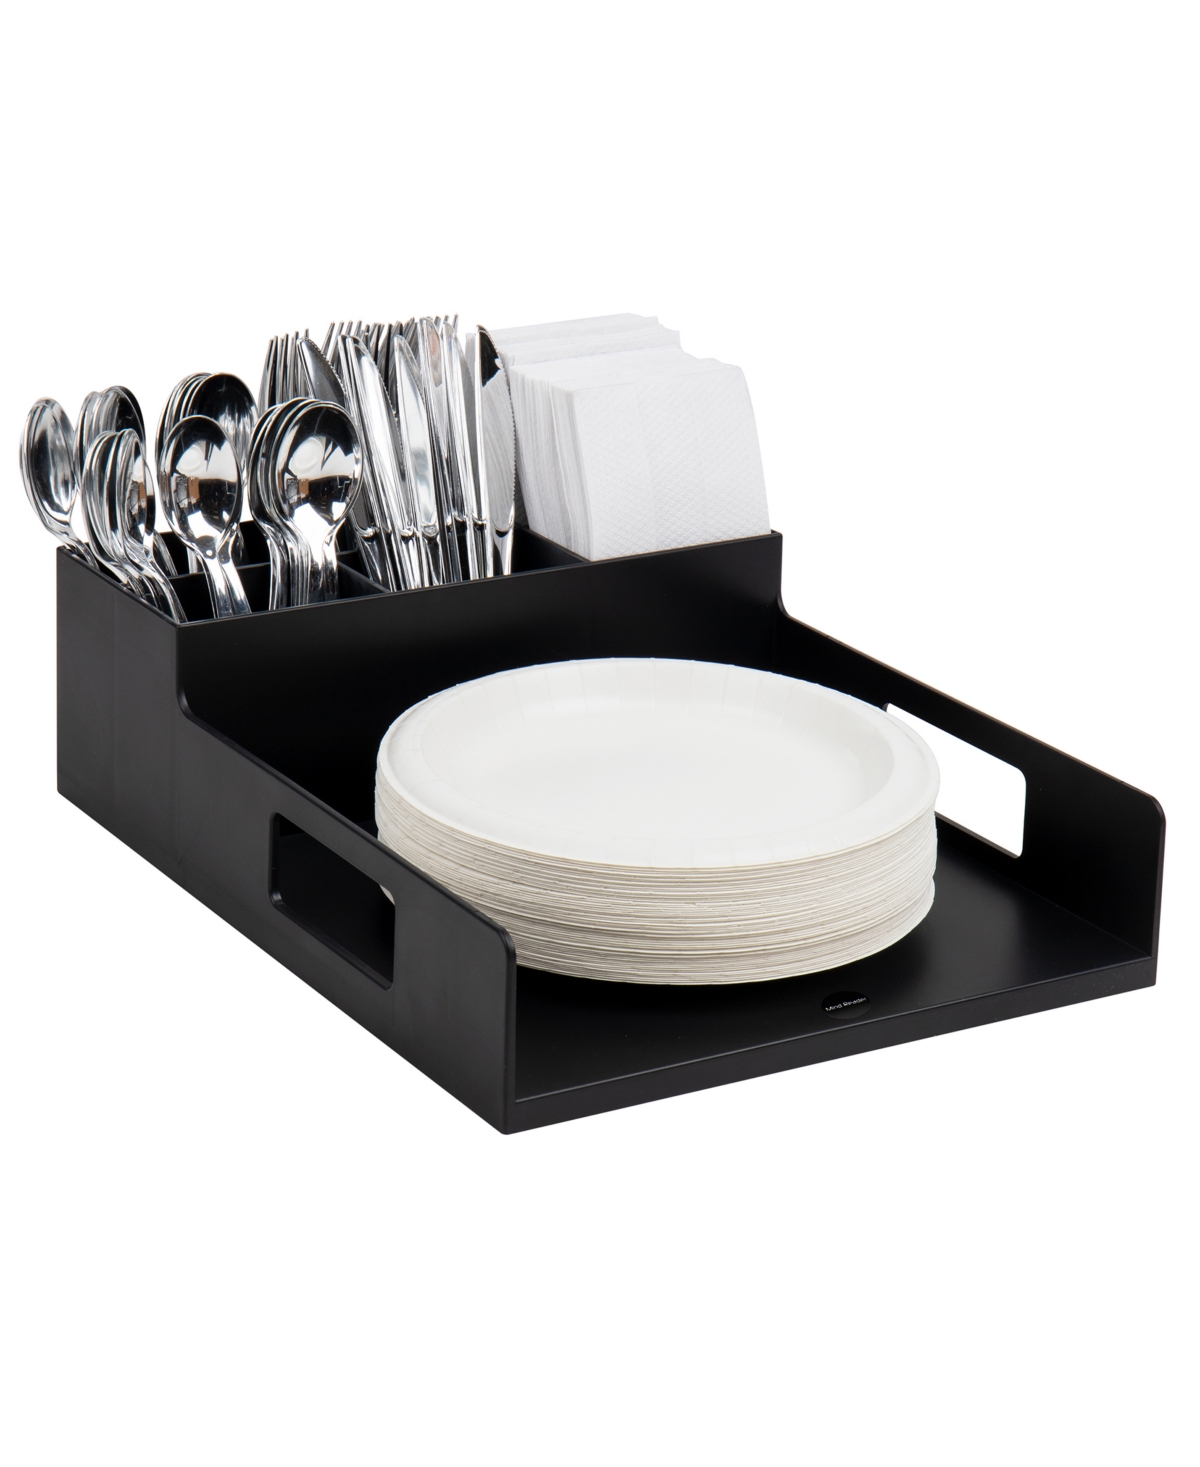 Shop Mind Reader Anchor Collection, Utensil, Napkin And Plate Serving Tray, Break Room, Countertop Organizer In Black